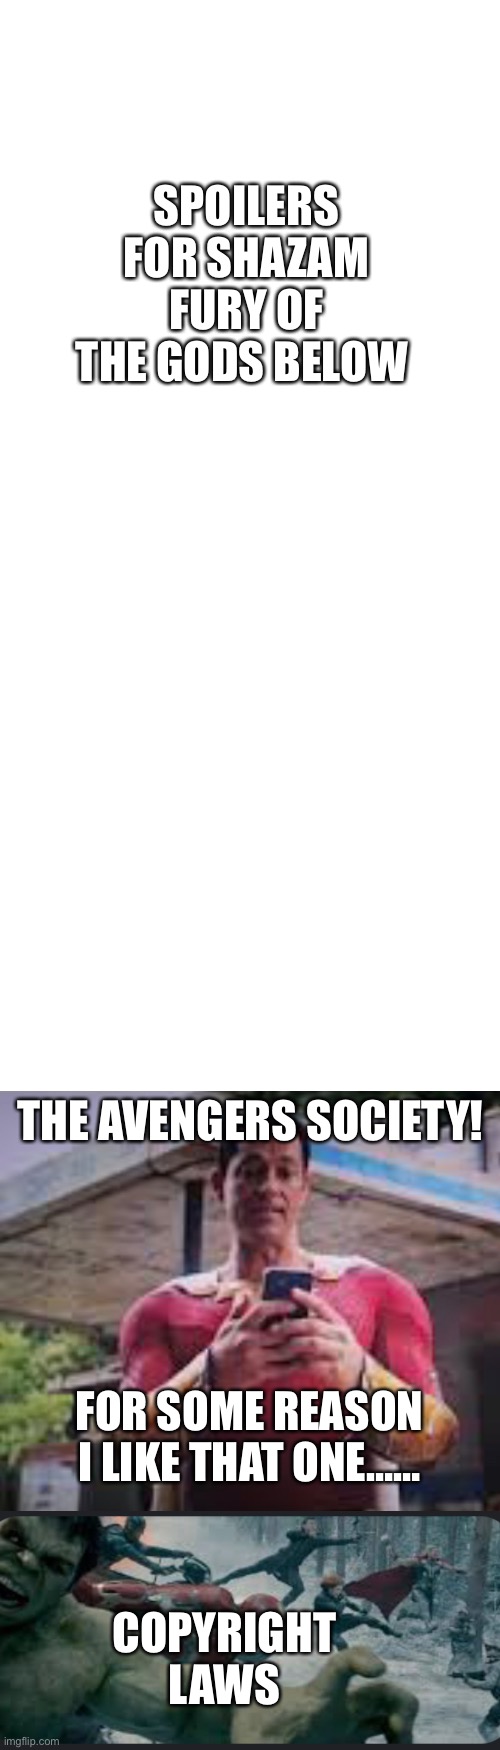 Yes, this is marvel, they also made a lord of the rings joke. | SPOILERS FOR SHAZAM FURY OF THE GODS BELOW; THE AVENGERS SOCIETY! FOR SOME REASON I LIKE THAT ONE……; COPYRIGHT LAWS | image tagged in marvel,shazam | made w/ Imgflip meme maker